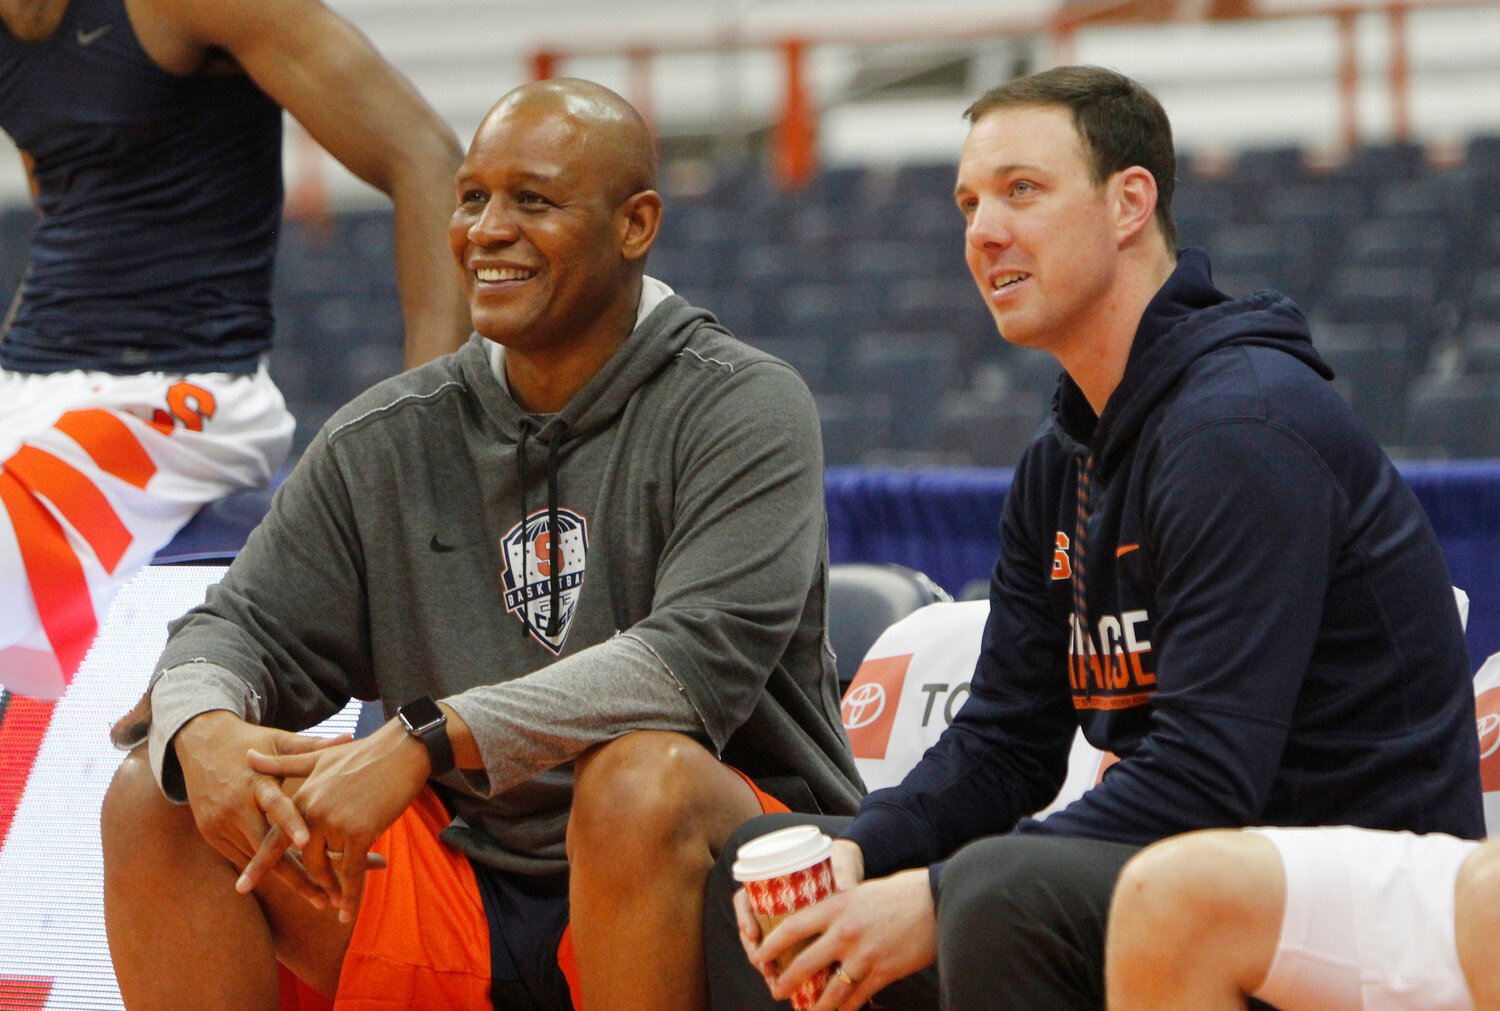 Adrian Autry, left, is the the new Syracuse men’s basketball coach. Gerry McNamara, right, is the associate head coach. This week, Brenden Straughn, not pictured, was added as an assistant on the staff.